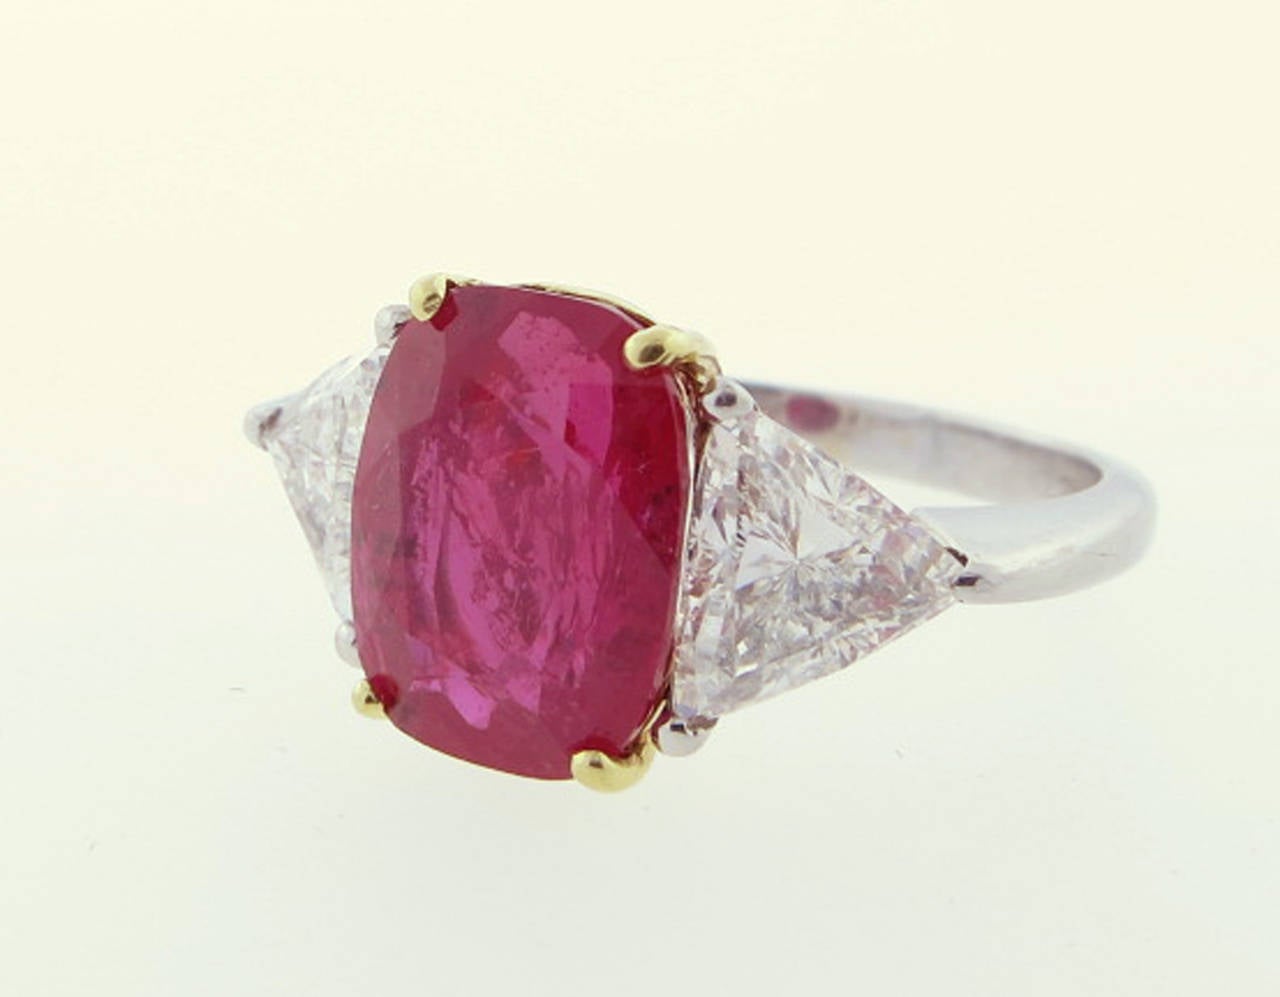 Handmade platinum and 18kt. yellow gold ruby and diamond ring.  GRS gemstone report  ruby weighing 5.7cts. measuring 11.4 x 8.7 x 5.59 mm.  Tajikistan origin. Each side is set with a triangular cut diamond each weighing approx 1.2cts. grading